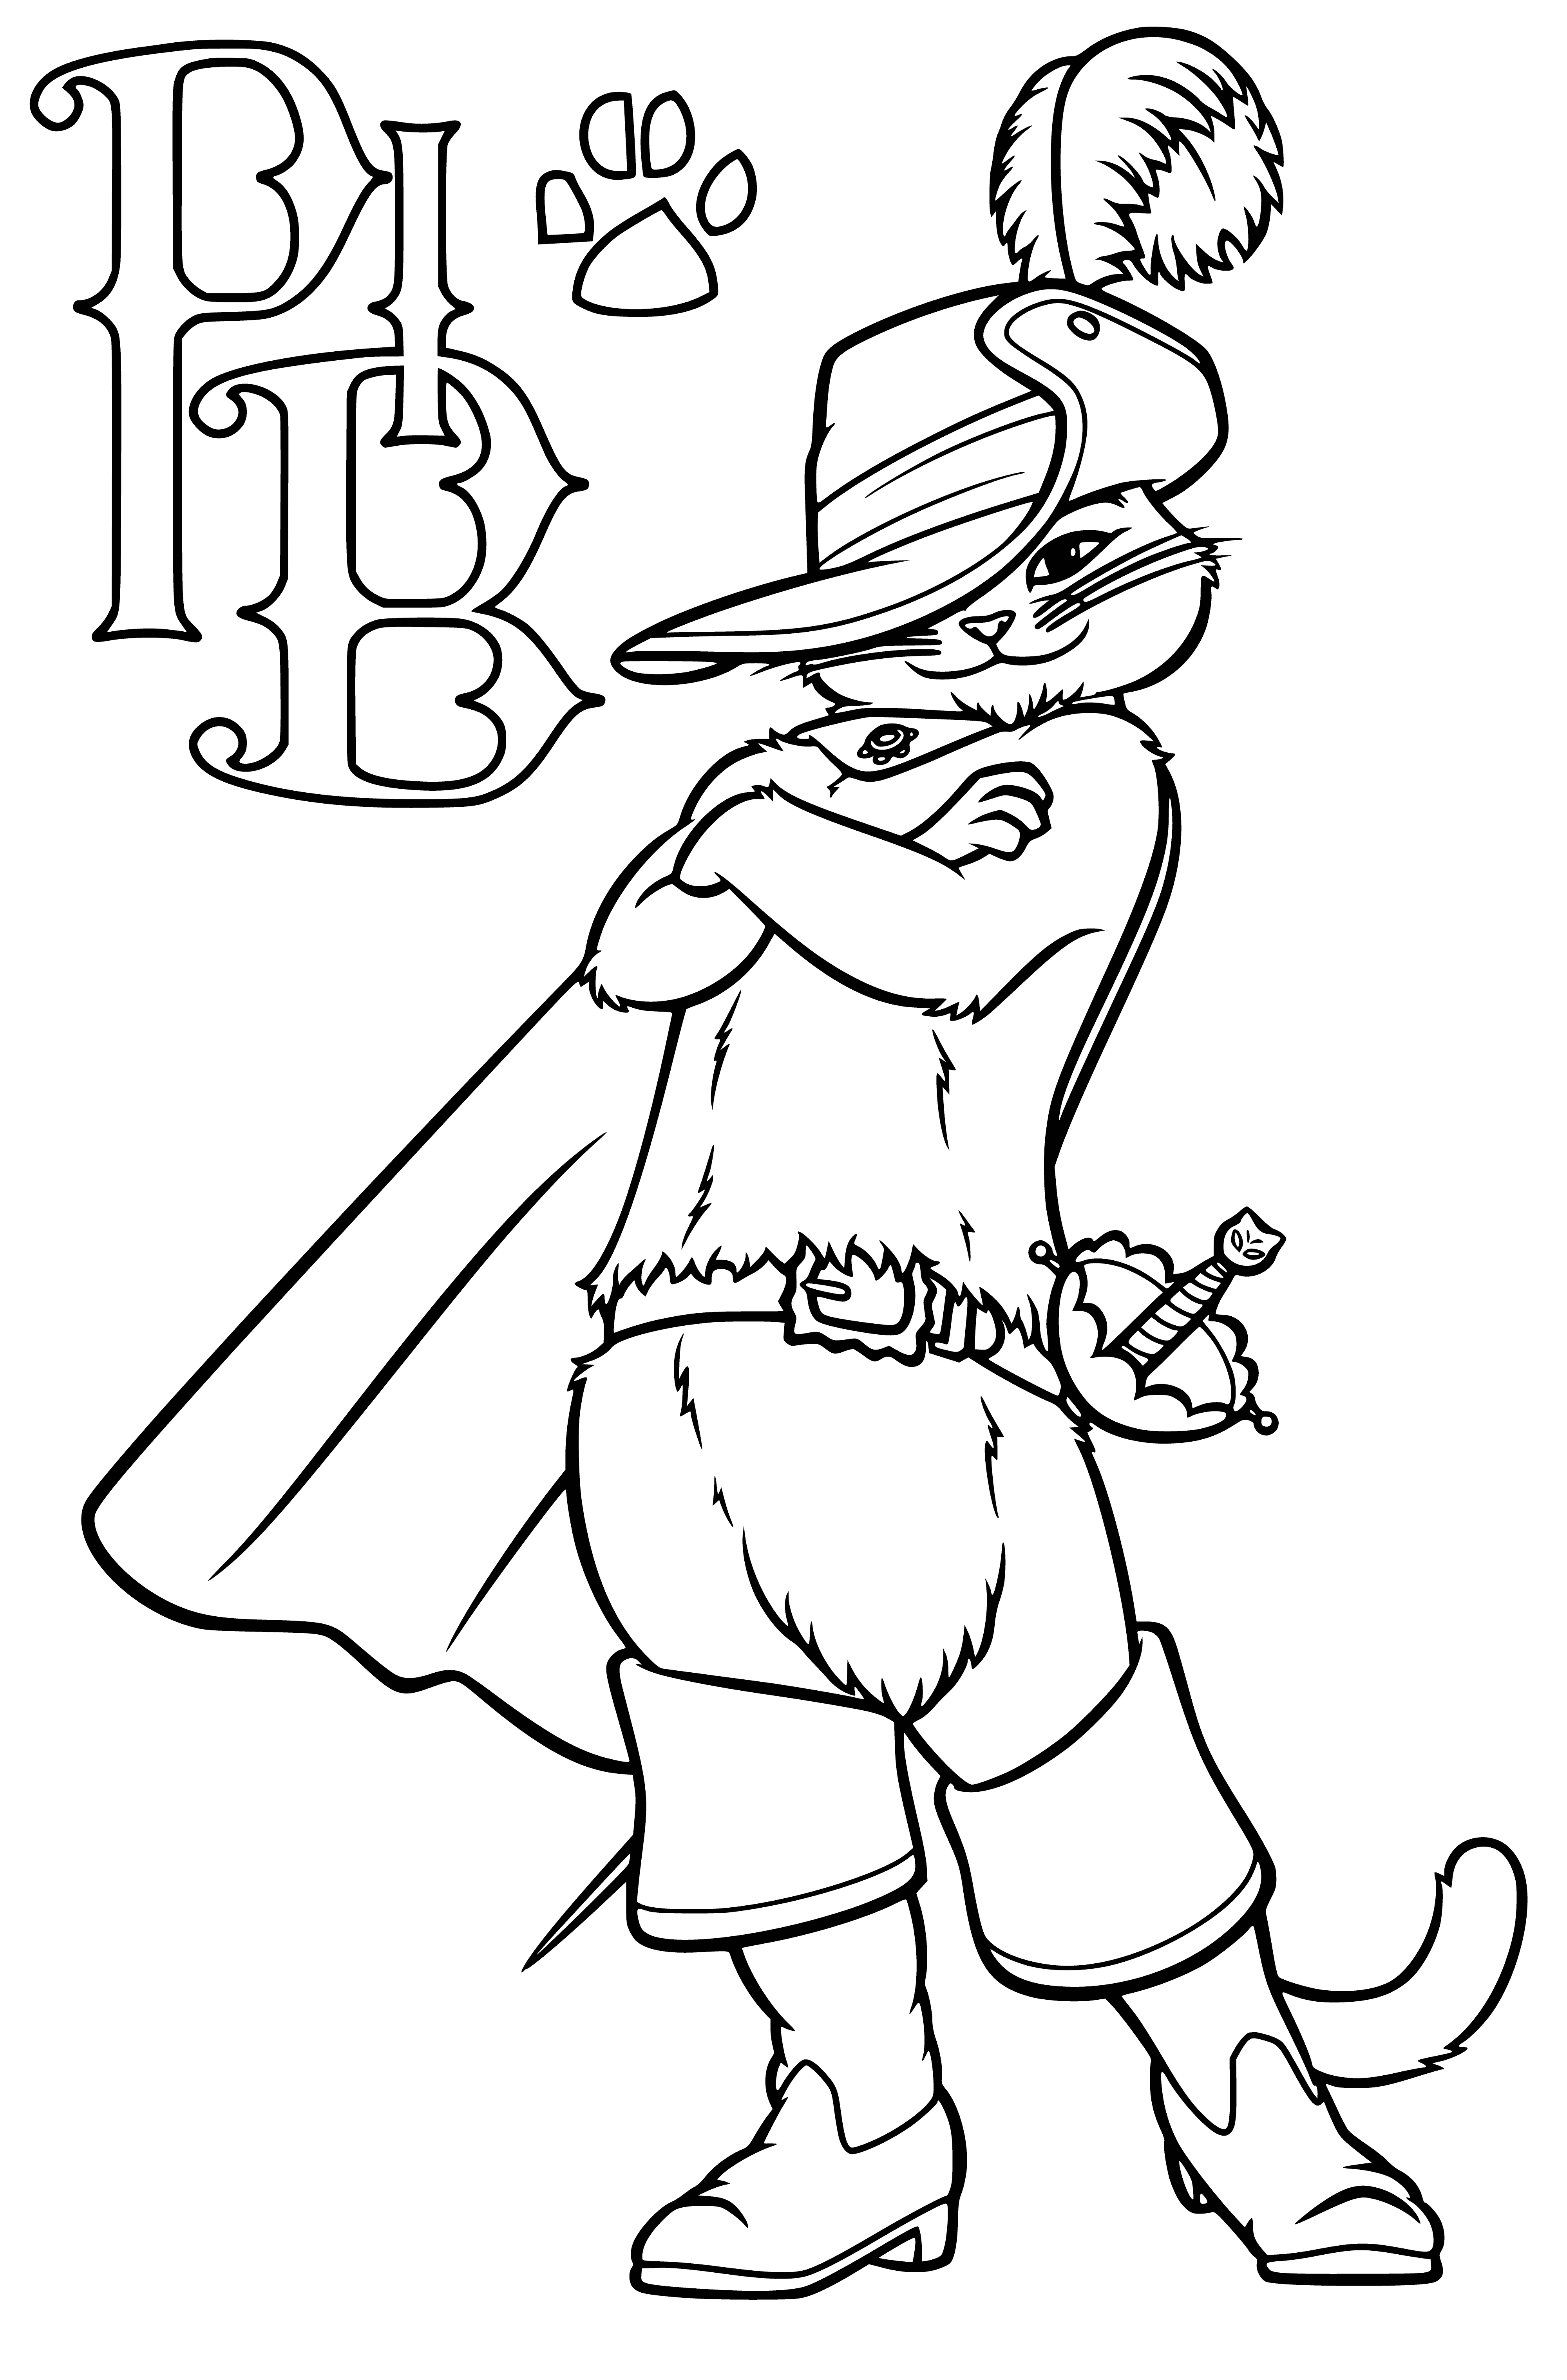 Puss in Boots coloring page